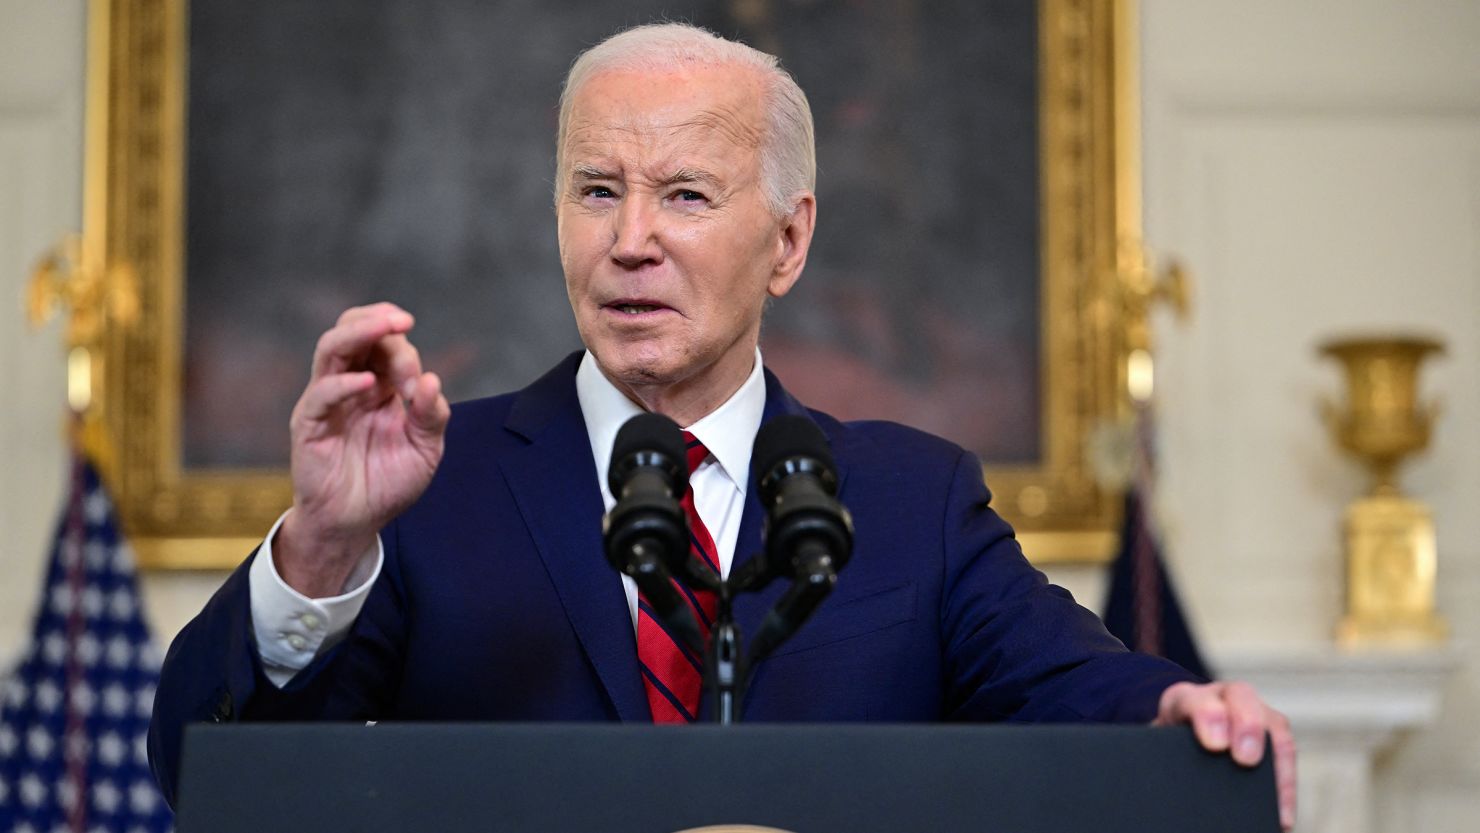 Biden's reelection campaign remains committed to using TikTok for outreach (Credits: CNN)